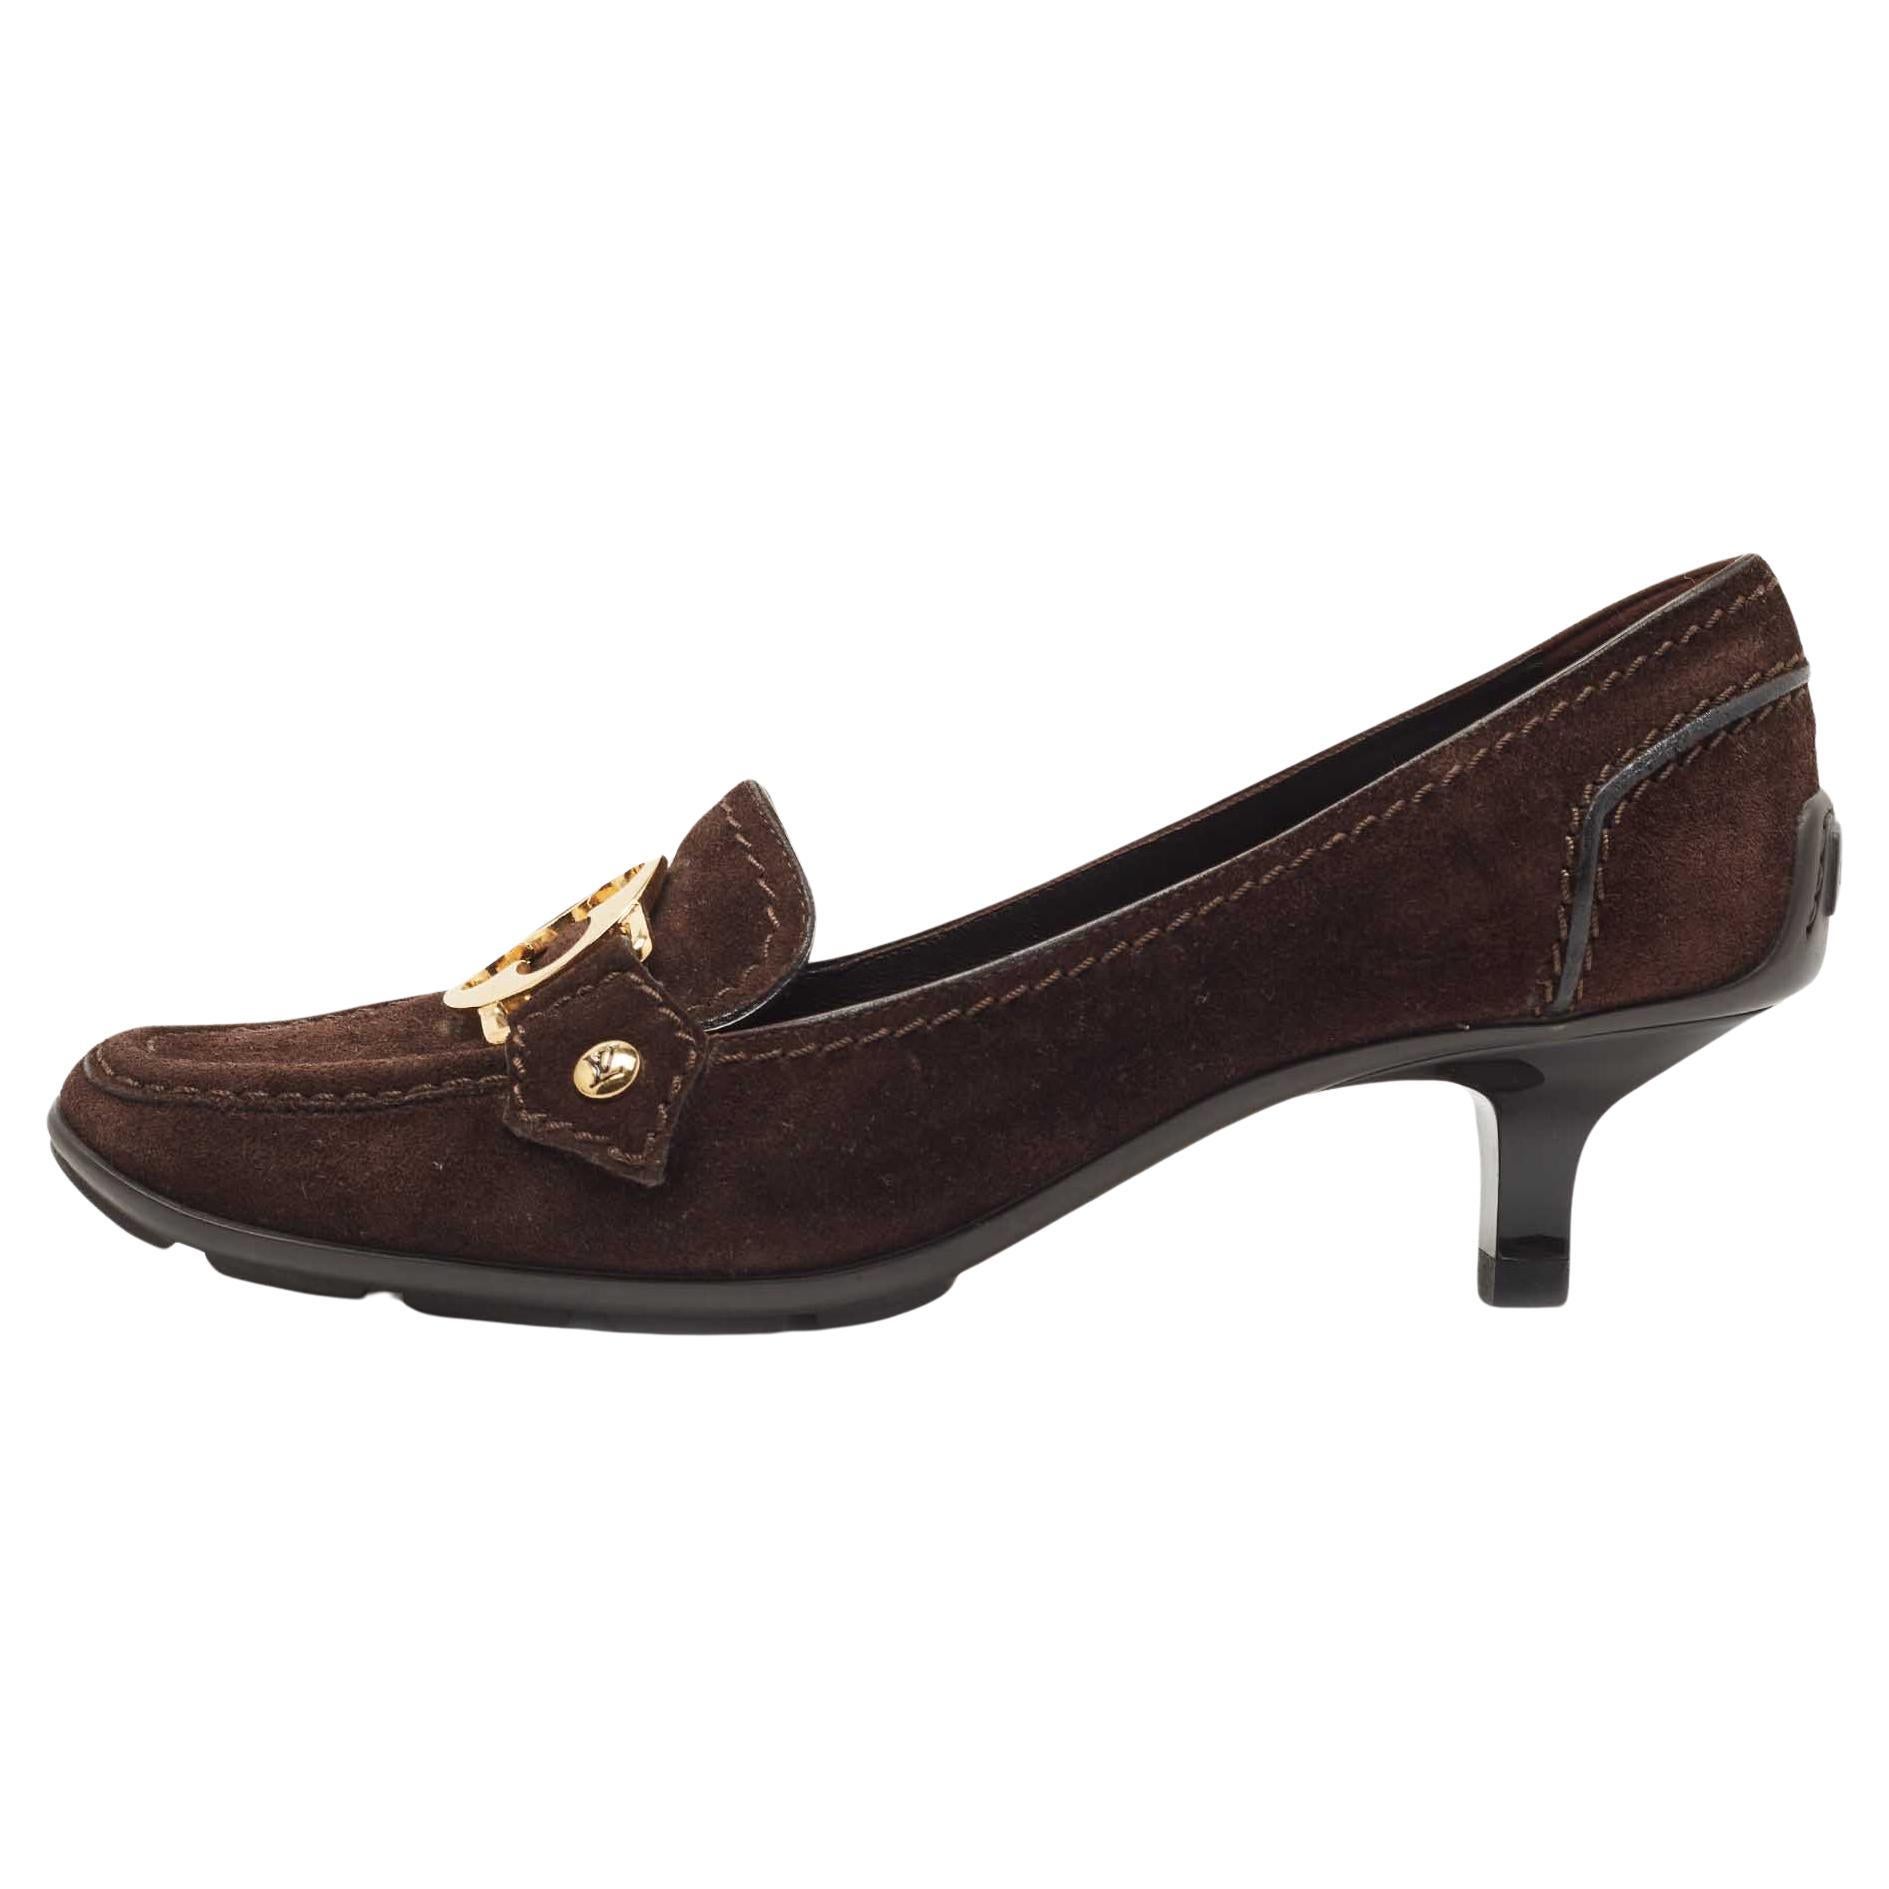 Louis Vuitton Brown Suede Leather Loafer Pumps Size 36 For Sale